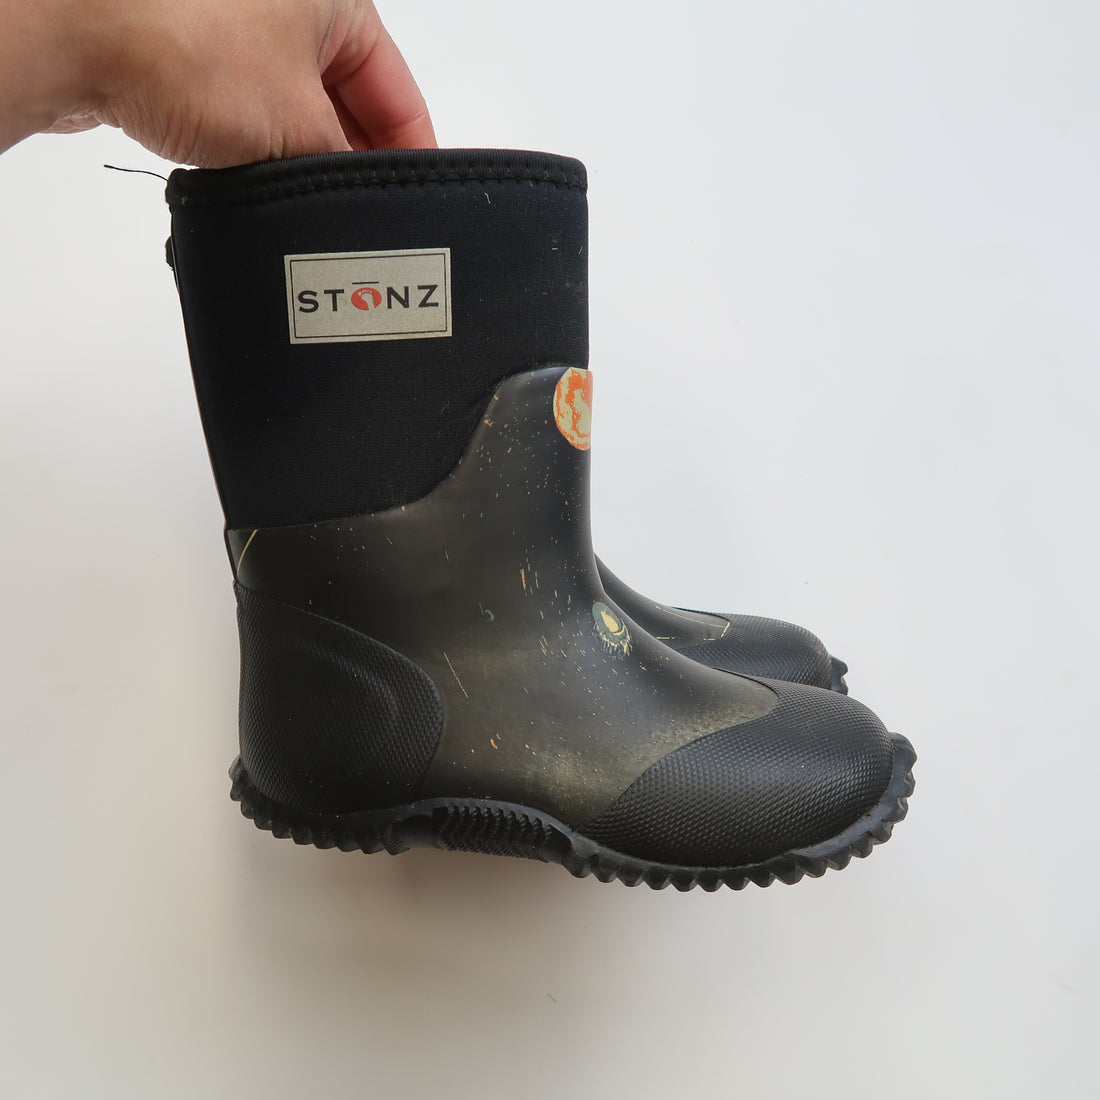 Stonz - Boots (Shoes - 8)